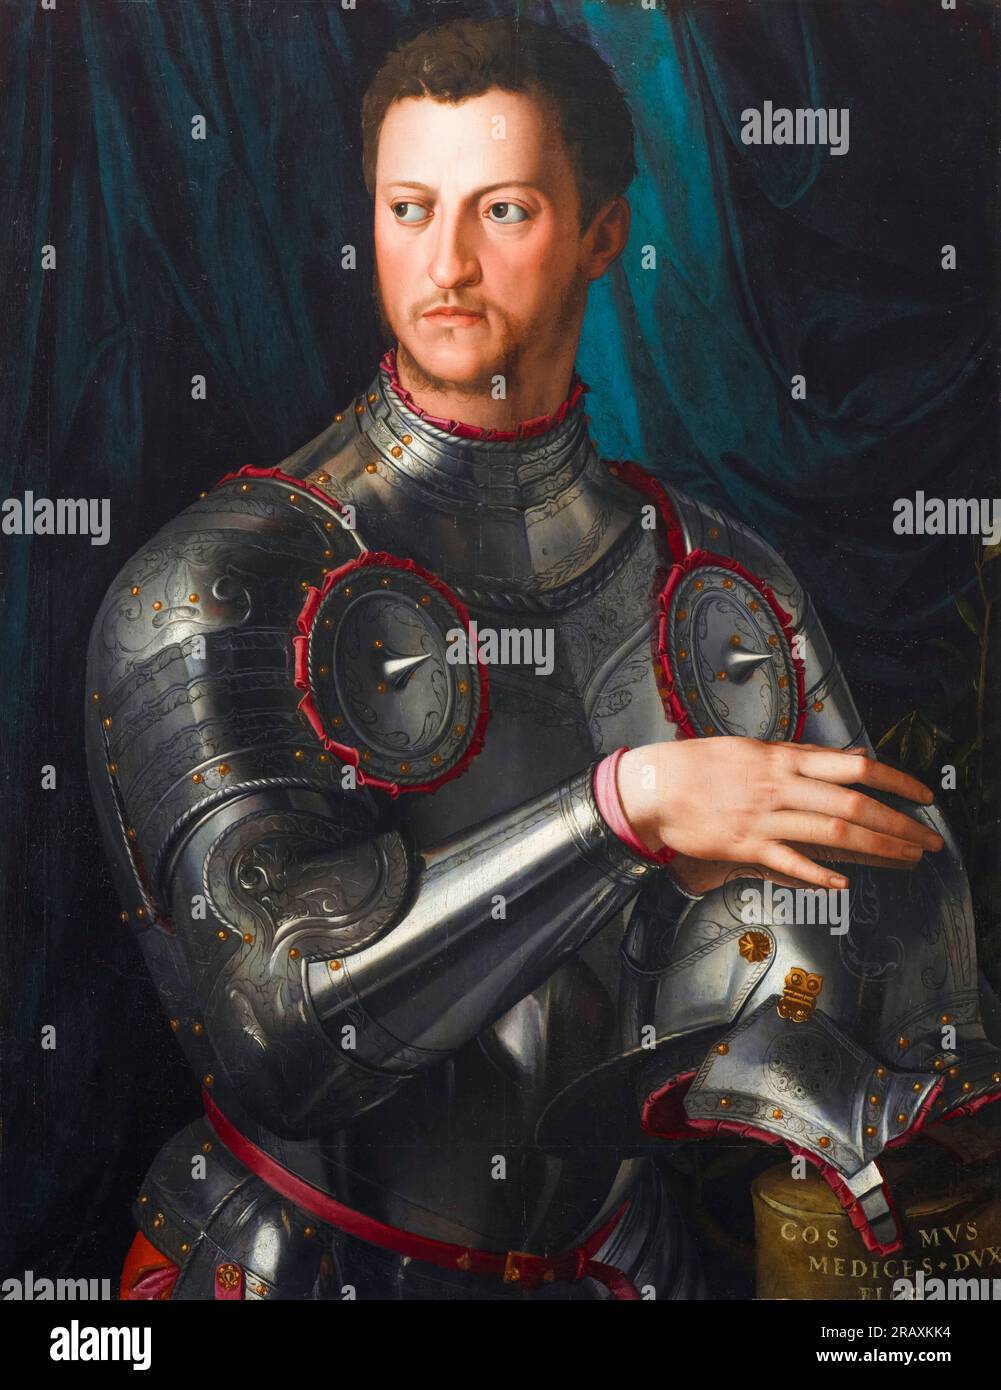 Cosimo I de Medici (1519-1574), second Duke of Florence (1537-1569), first Grand Duke of Tuscany (1569-1574), in full armour, portrait painting in oil on panel by Agnolo Bronzino, circa 1545 Stock Photo